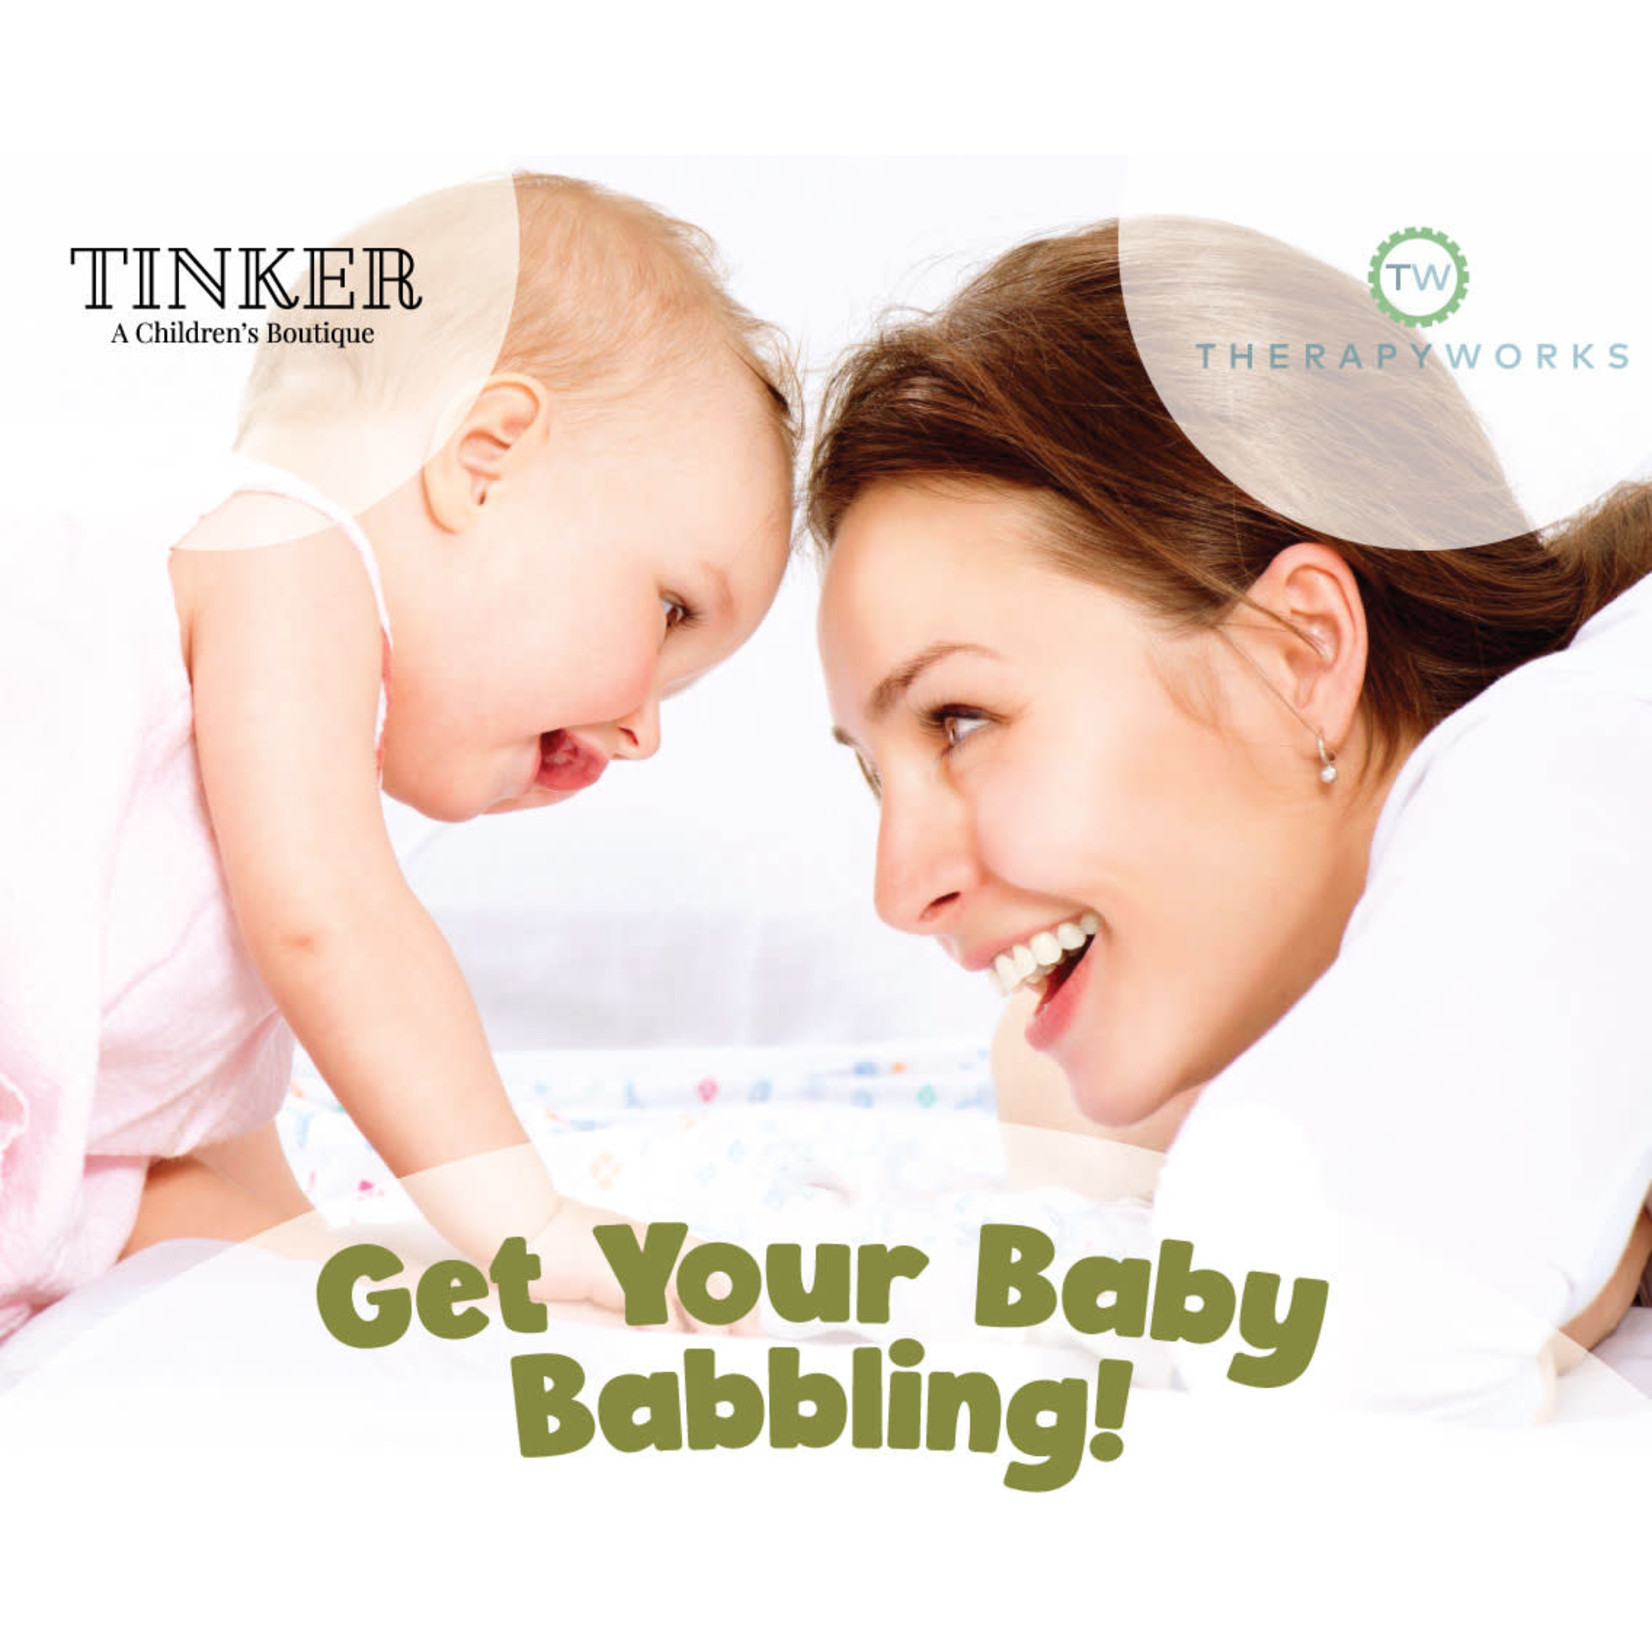 Get Your Baby Babbling Class - Sunday, June 26th @ 10:30am